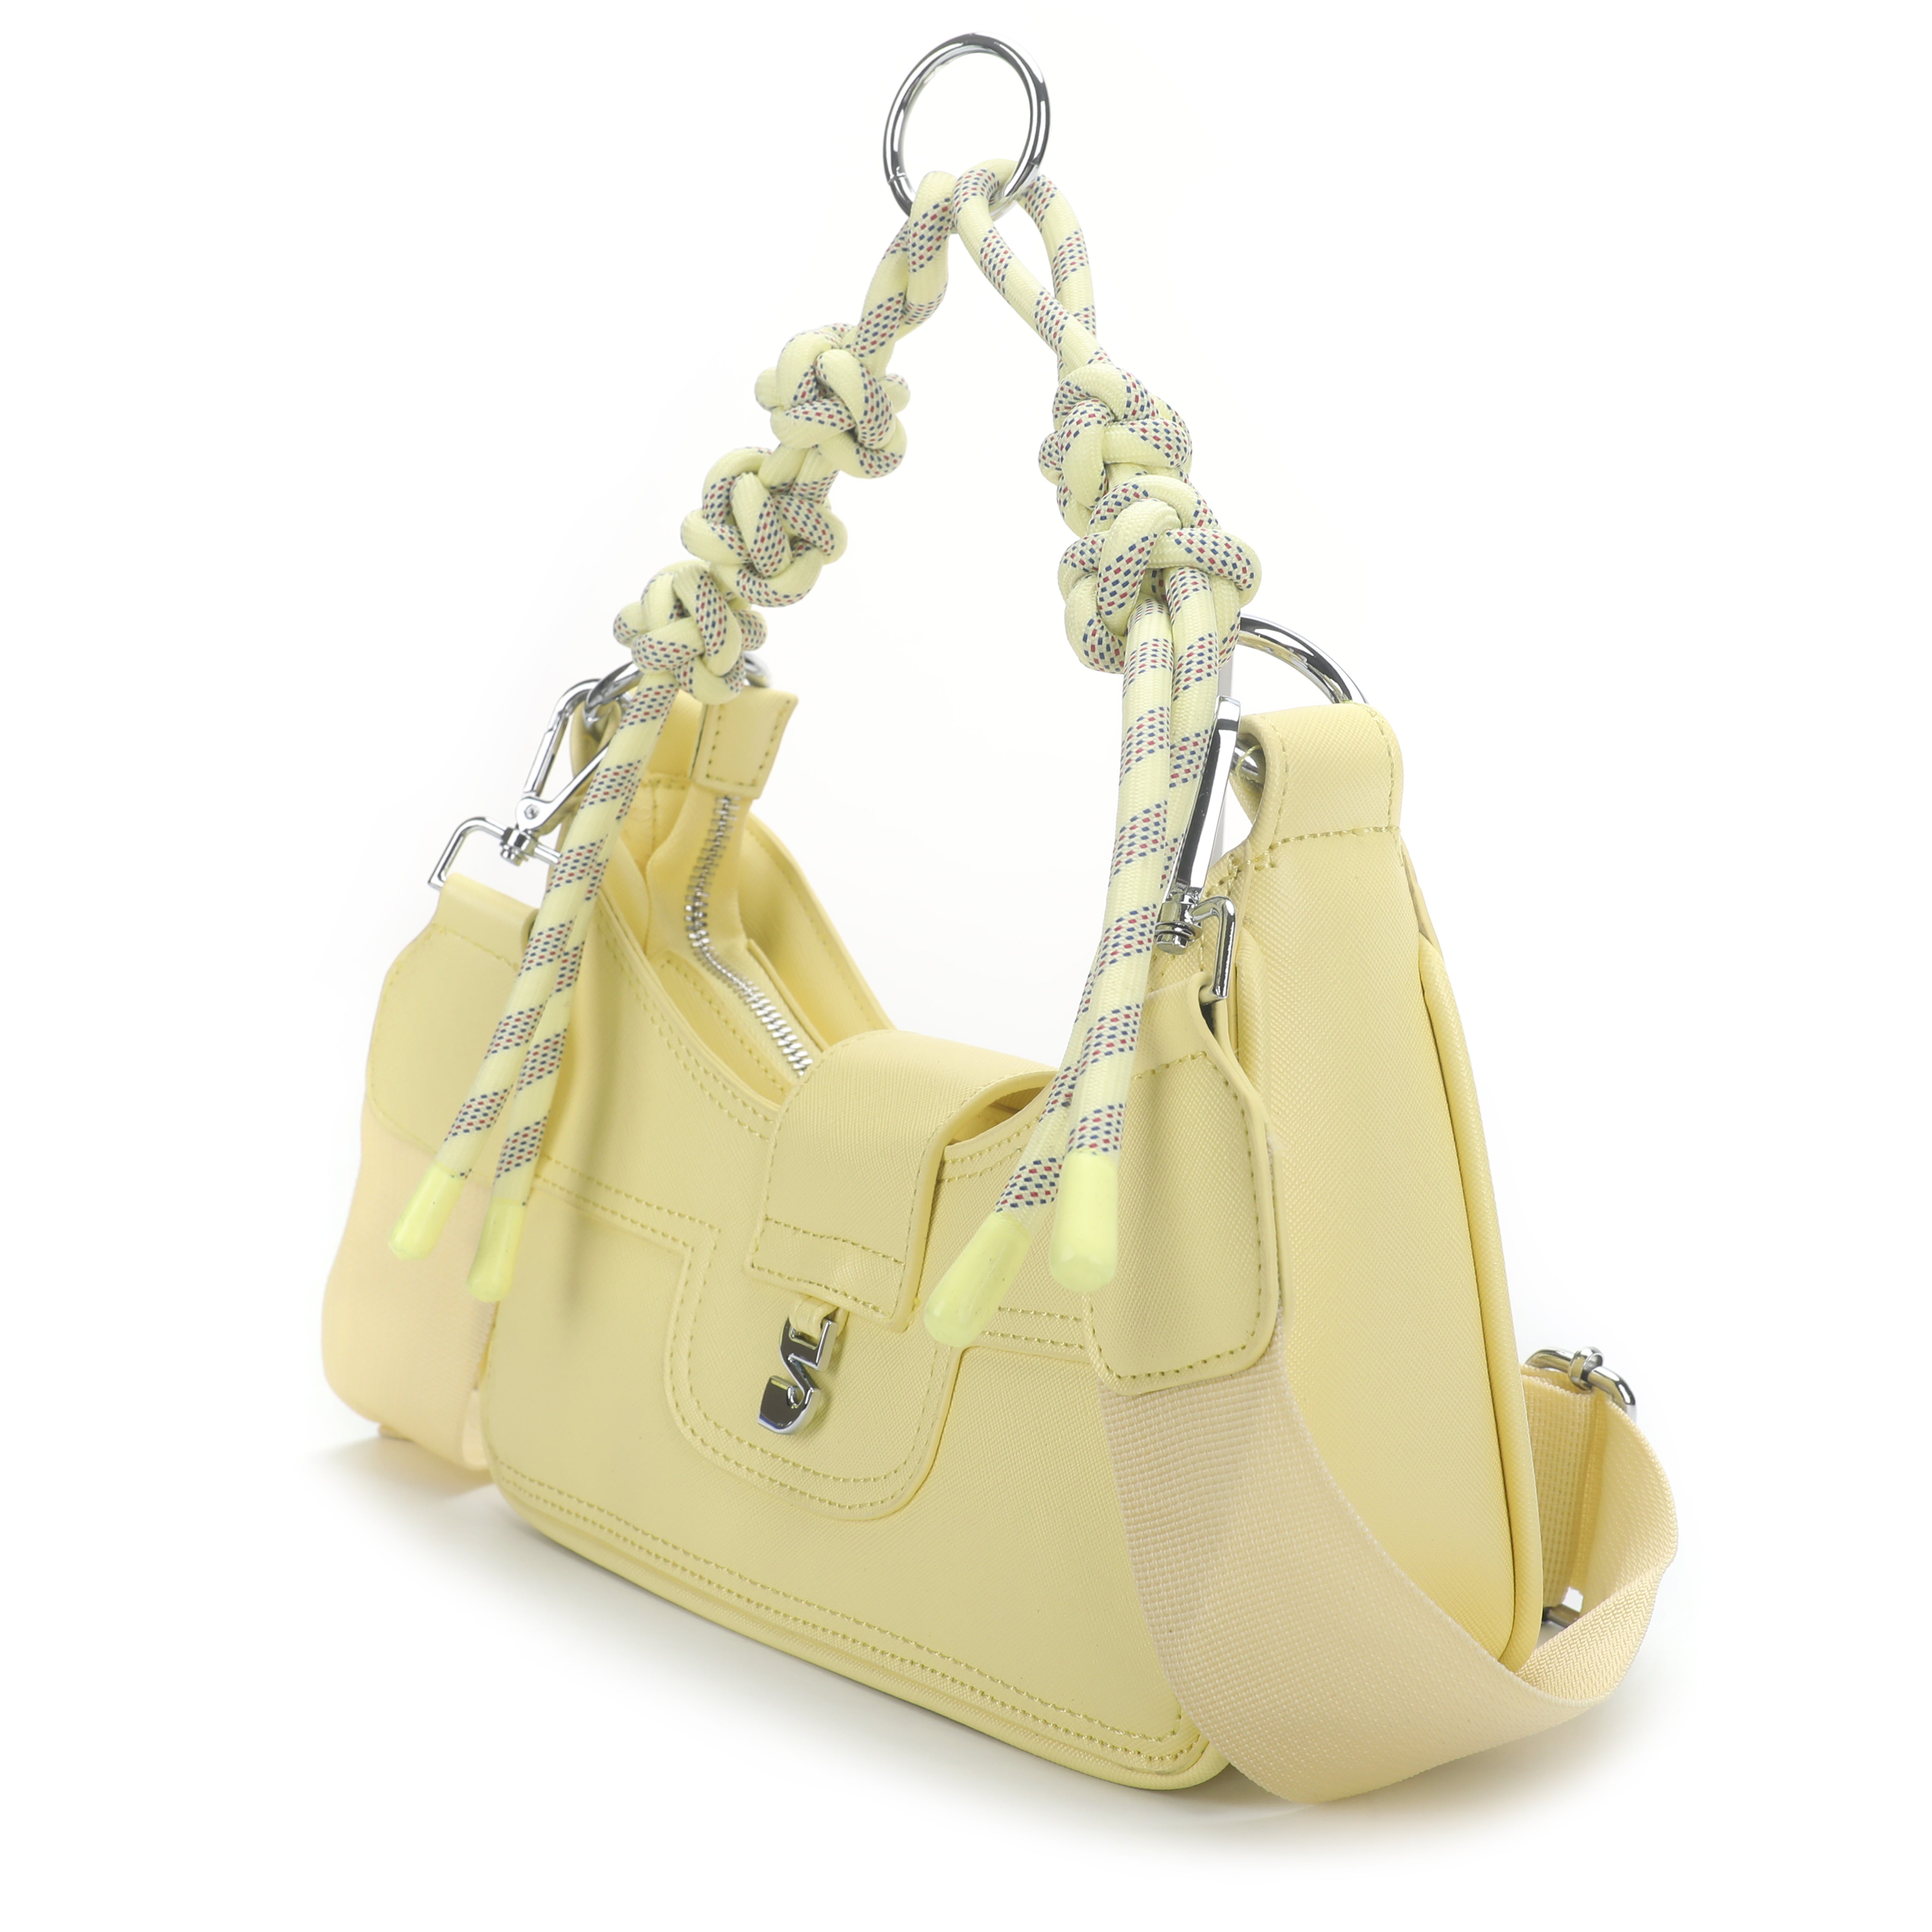 THE RECYCLED ALBA SHOULDER BAG - LIGHT YELLOW - EXCLUSIVE Bags from SILFEN STUDIO - Just €79.99! SHOP NOW AT IAMINHATELOVE BOTH IN STORE FOR CYPRUS AND ONLINE WORLDWIDE @ IAMINHATELOVE.COM